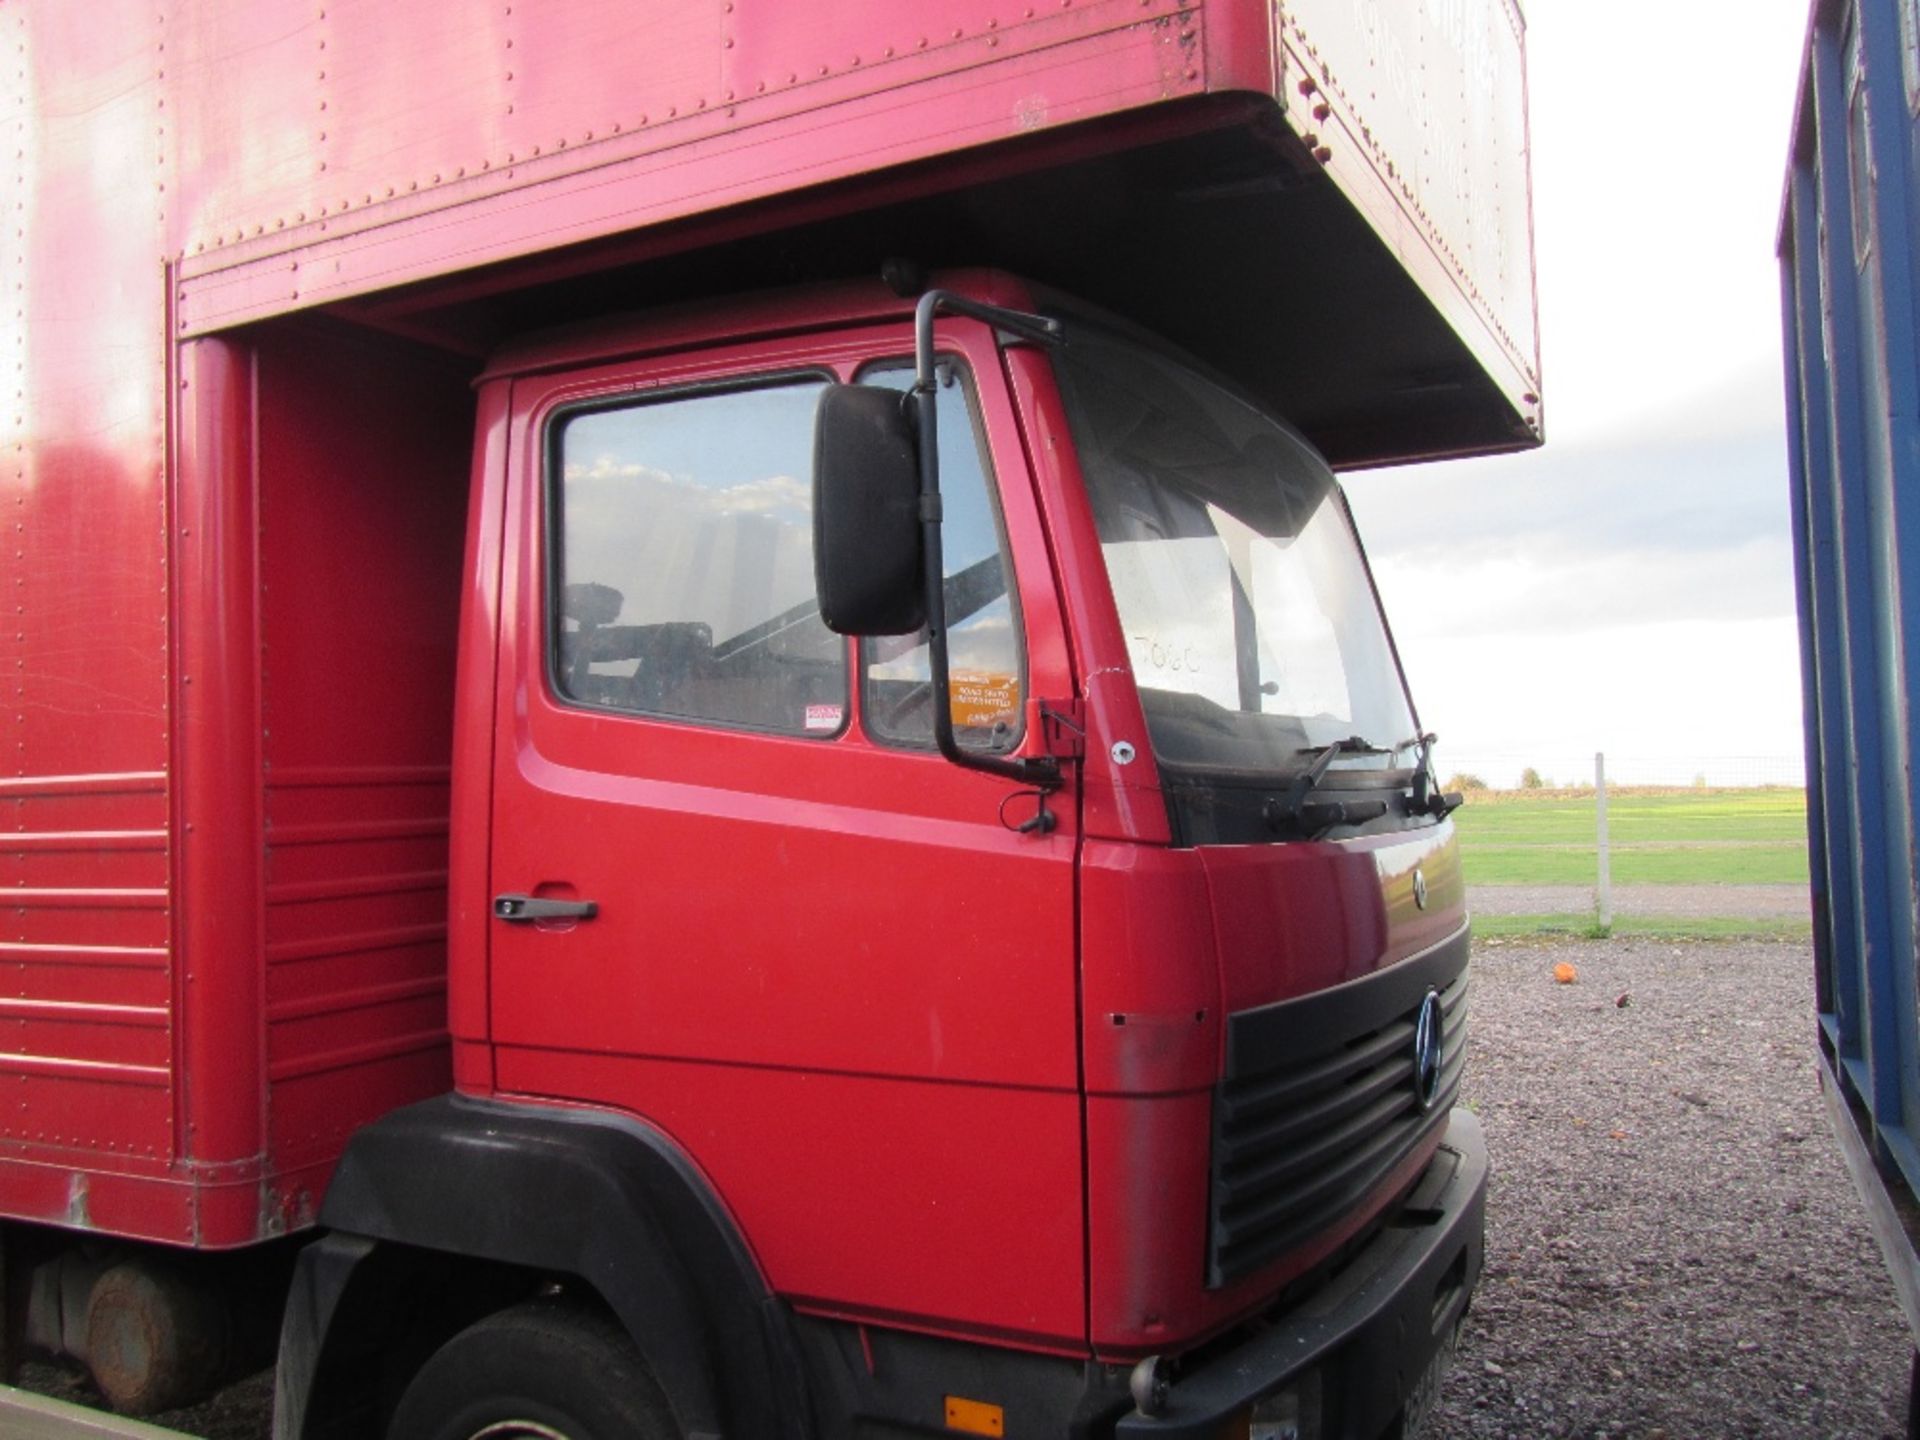 Mercedes 814 7.5 Ton 24ft Box Lorry. Reg. Docs will be supplied. No Test or MOT. Reg. No. R944 RNL - Image 2 of 7